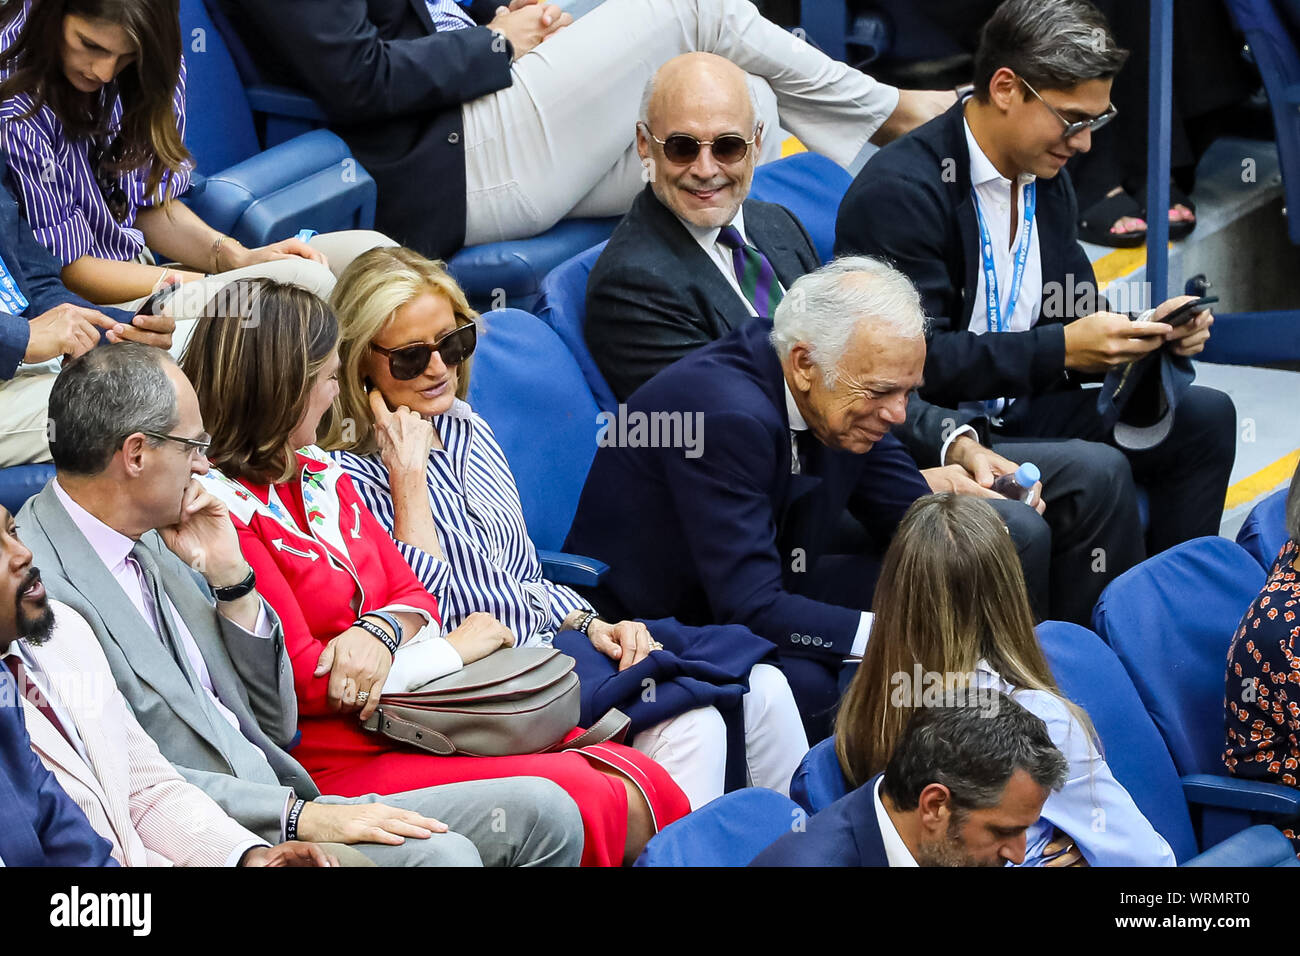 New York, USA. 08th Sep, 2019. Fashion designer Ralph Lauren and wife Ricky  Anne Loew-Beer watch Rafael Nadal of Spain against Daniil Medvedev of  Russia in the men's singles final at Arthur